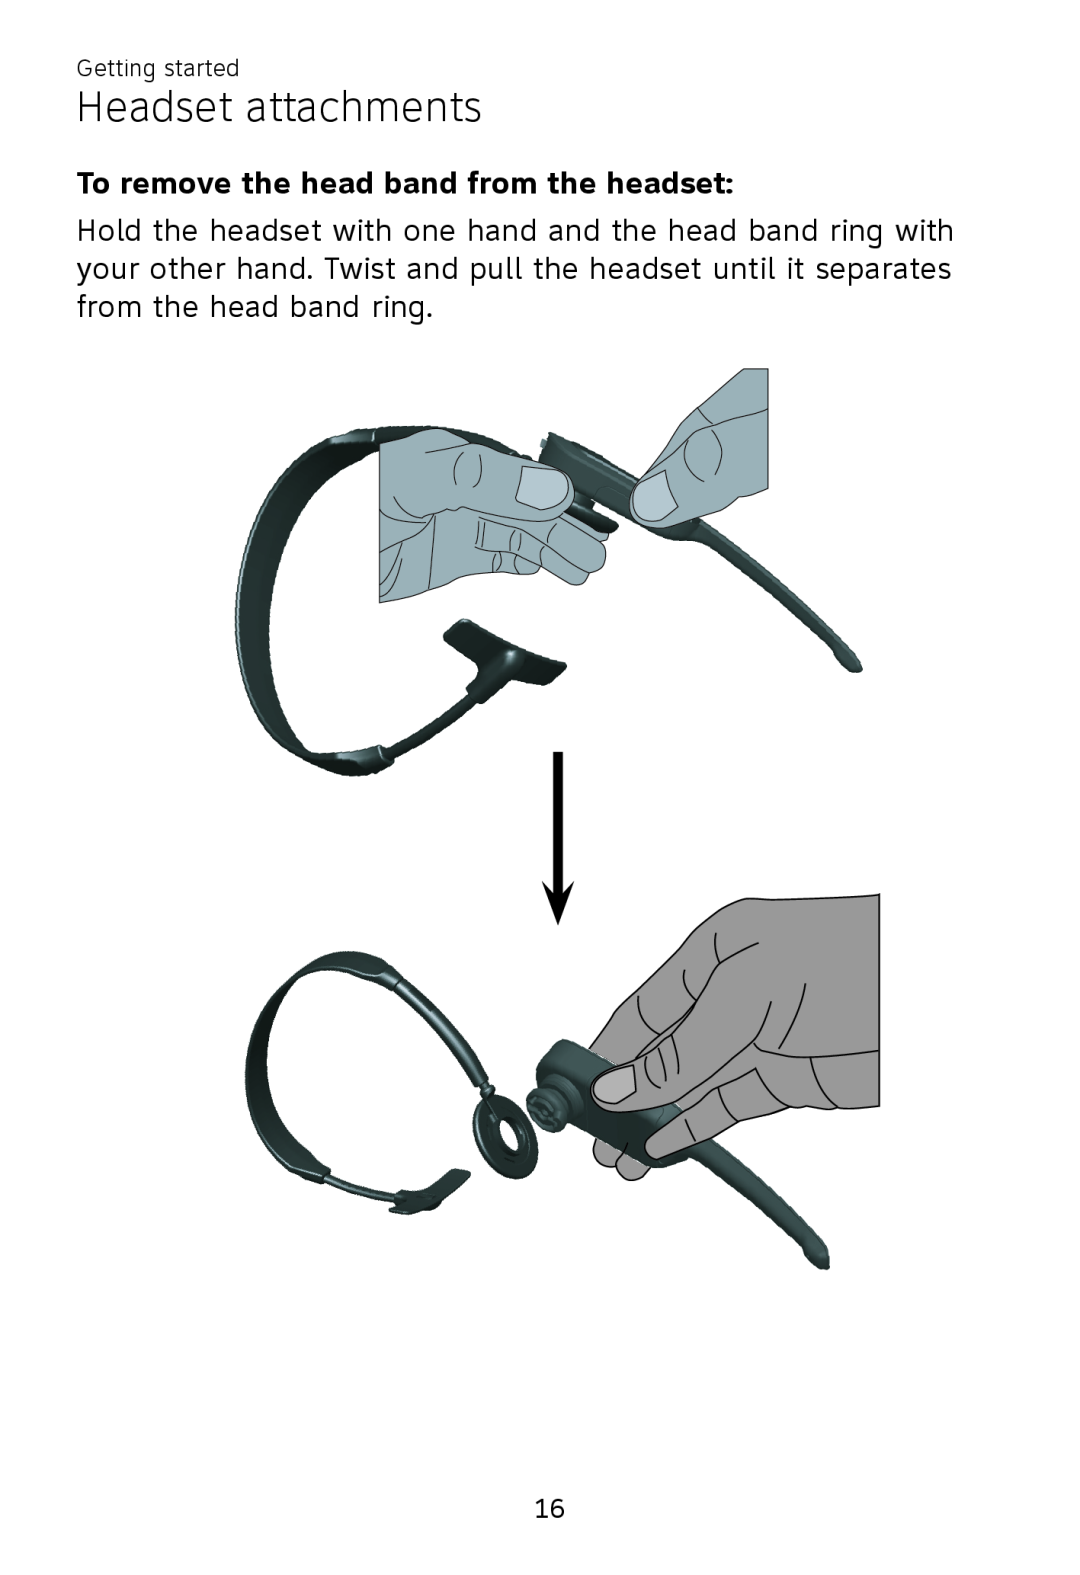 AT&T TL7700 user manual To remove the head band from the headset, Headset attachments 